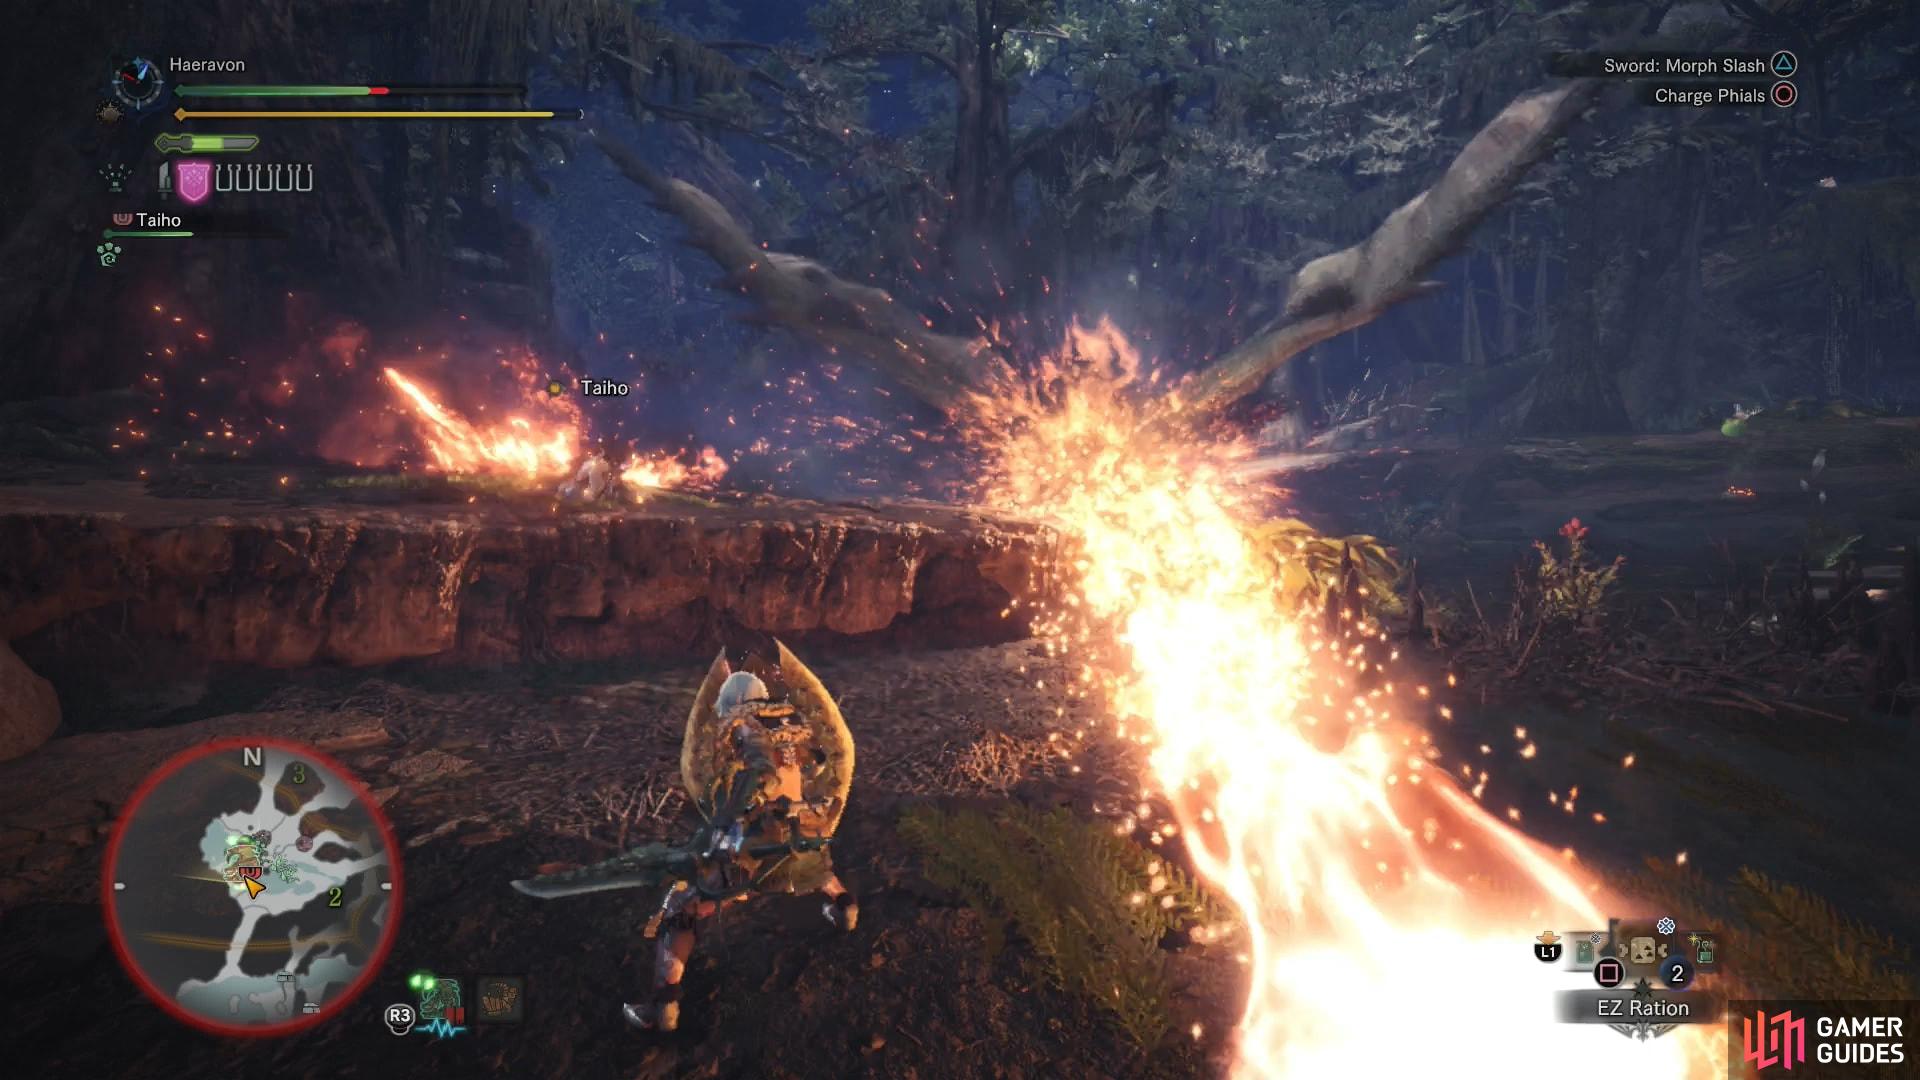 Along with bites and annoying charge attacks, the Rathian can spit fireballs with tremendous force, sometimes in volleys of three